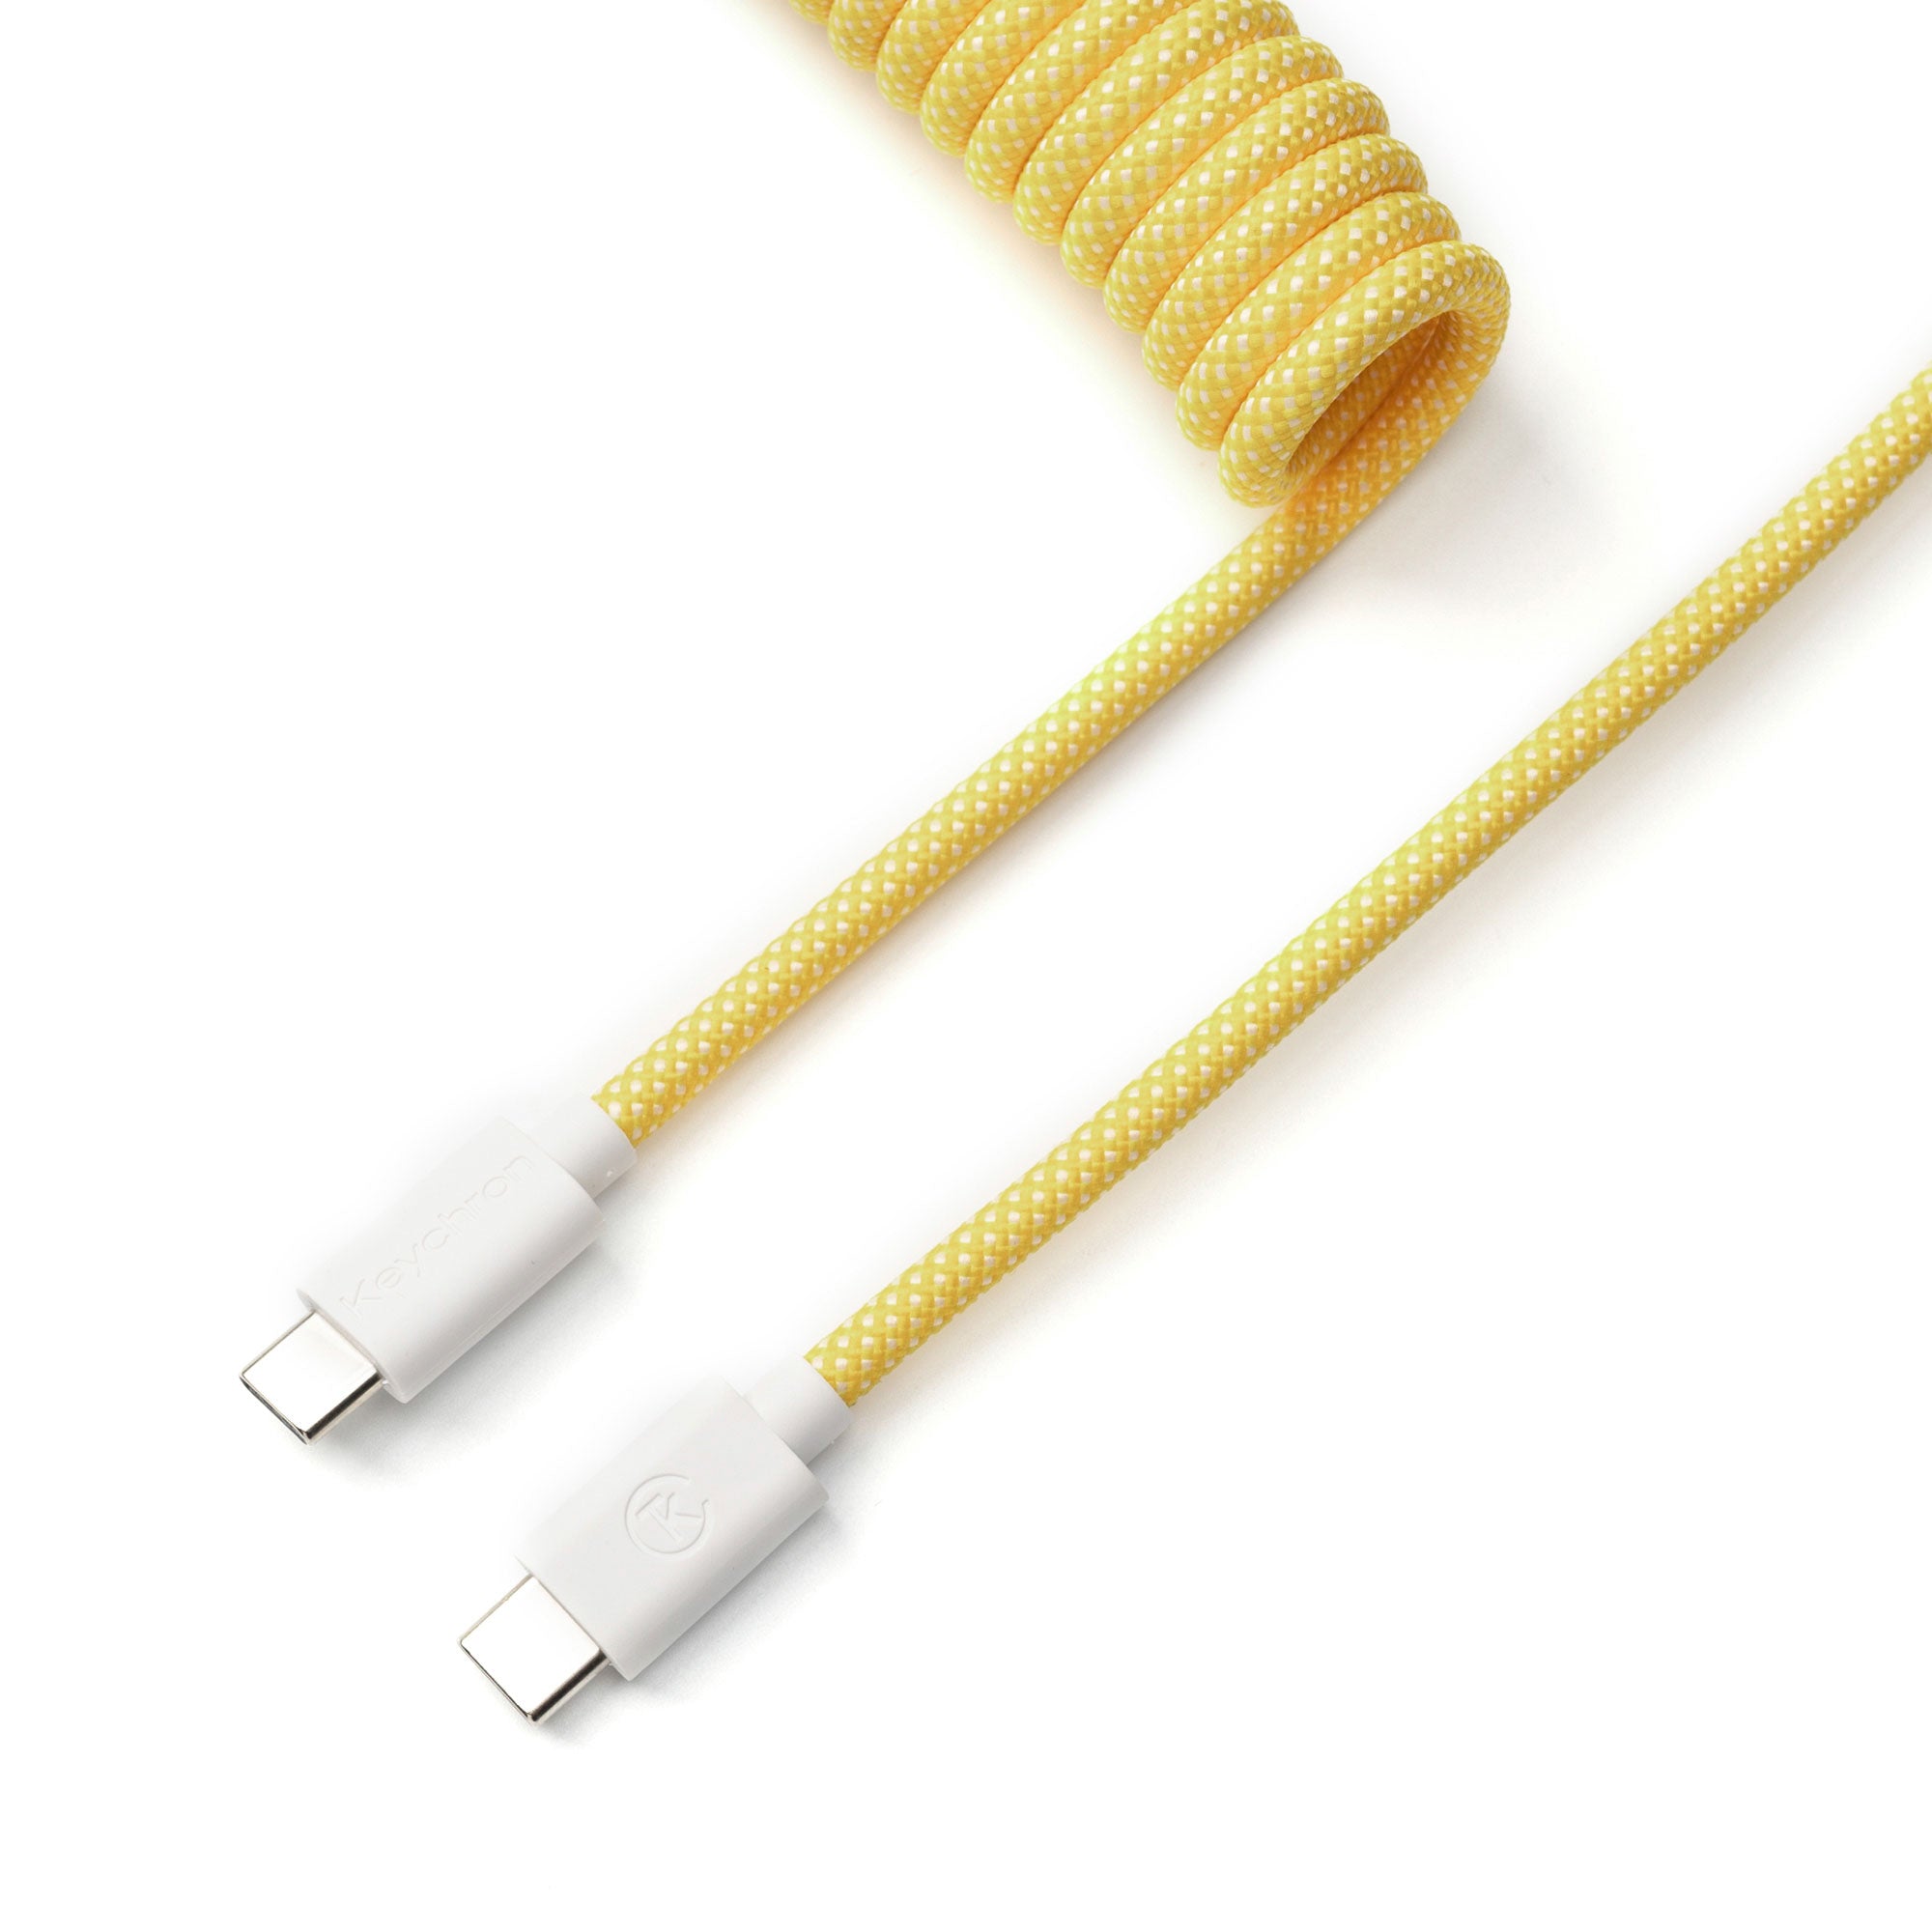 Keychron custom coiled aviator USB type-C cable for keyboards yellow color